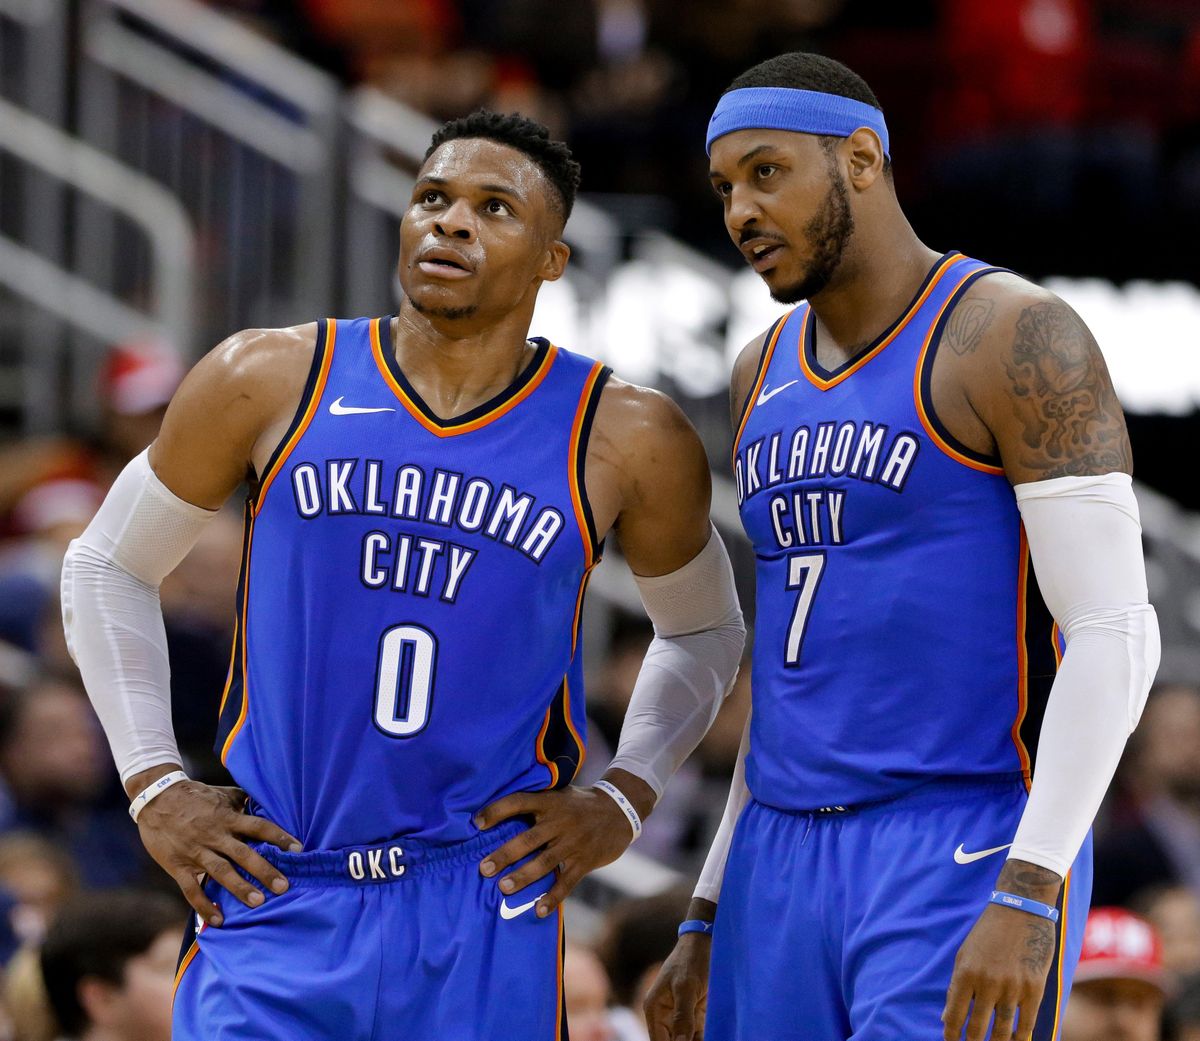 In this Saturday, April 7, 2018 file photo, Oklahoma City Thunder guard Russell Westbrook (0) and forward Carmelo Anthony (7) talk during the second half of the team’s NBA basketball game against the Houston Rockets in Houston. Anthony has been the No. 1 option for whatever team he has played on during most of his basketball career. He knew that wasn’t going to be the case when he arrived in Oklahoma City, though it’s safe to say things haven’t gone as he expected when he signed up to be part the league’s next Big Three. (Michael Wyke / Associated Press)